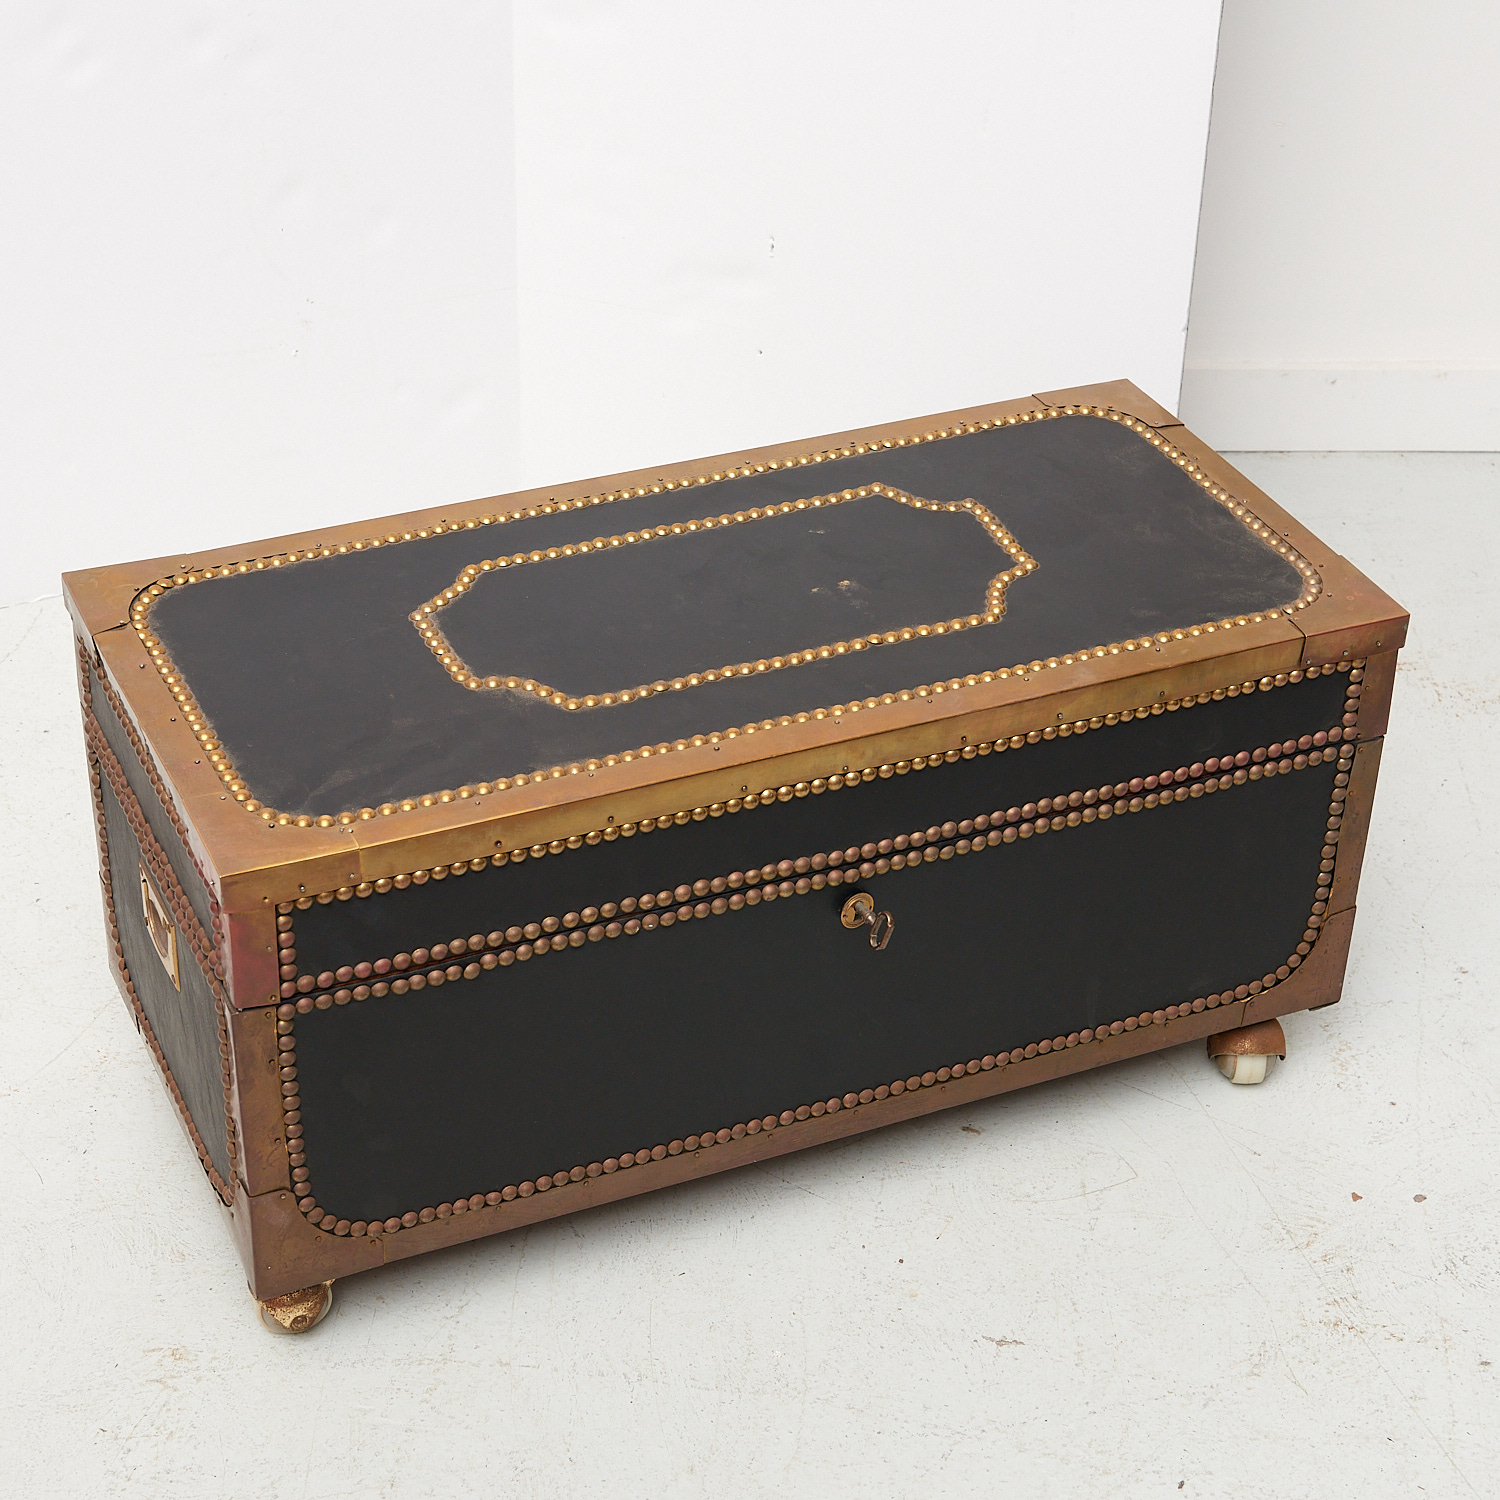 CAMPAIGN STYLE TACKED LEATHER TRUNK 3622d9